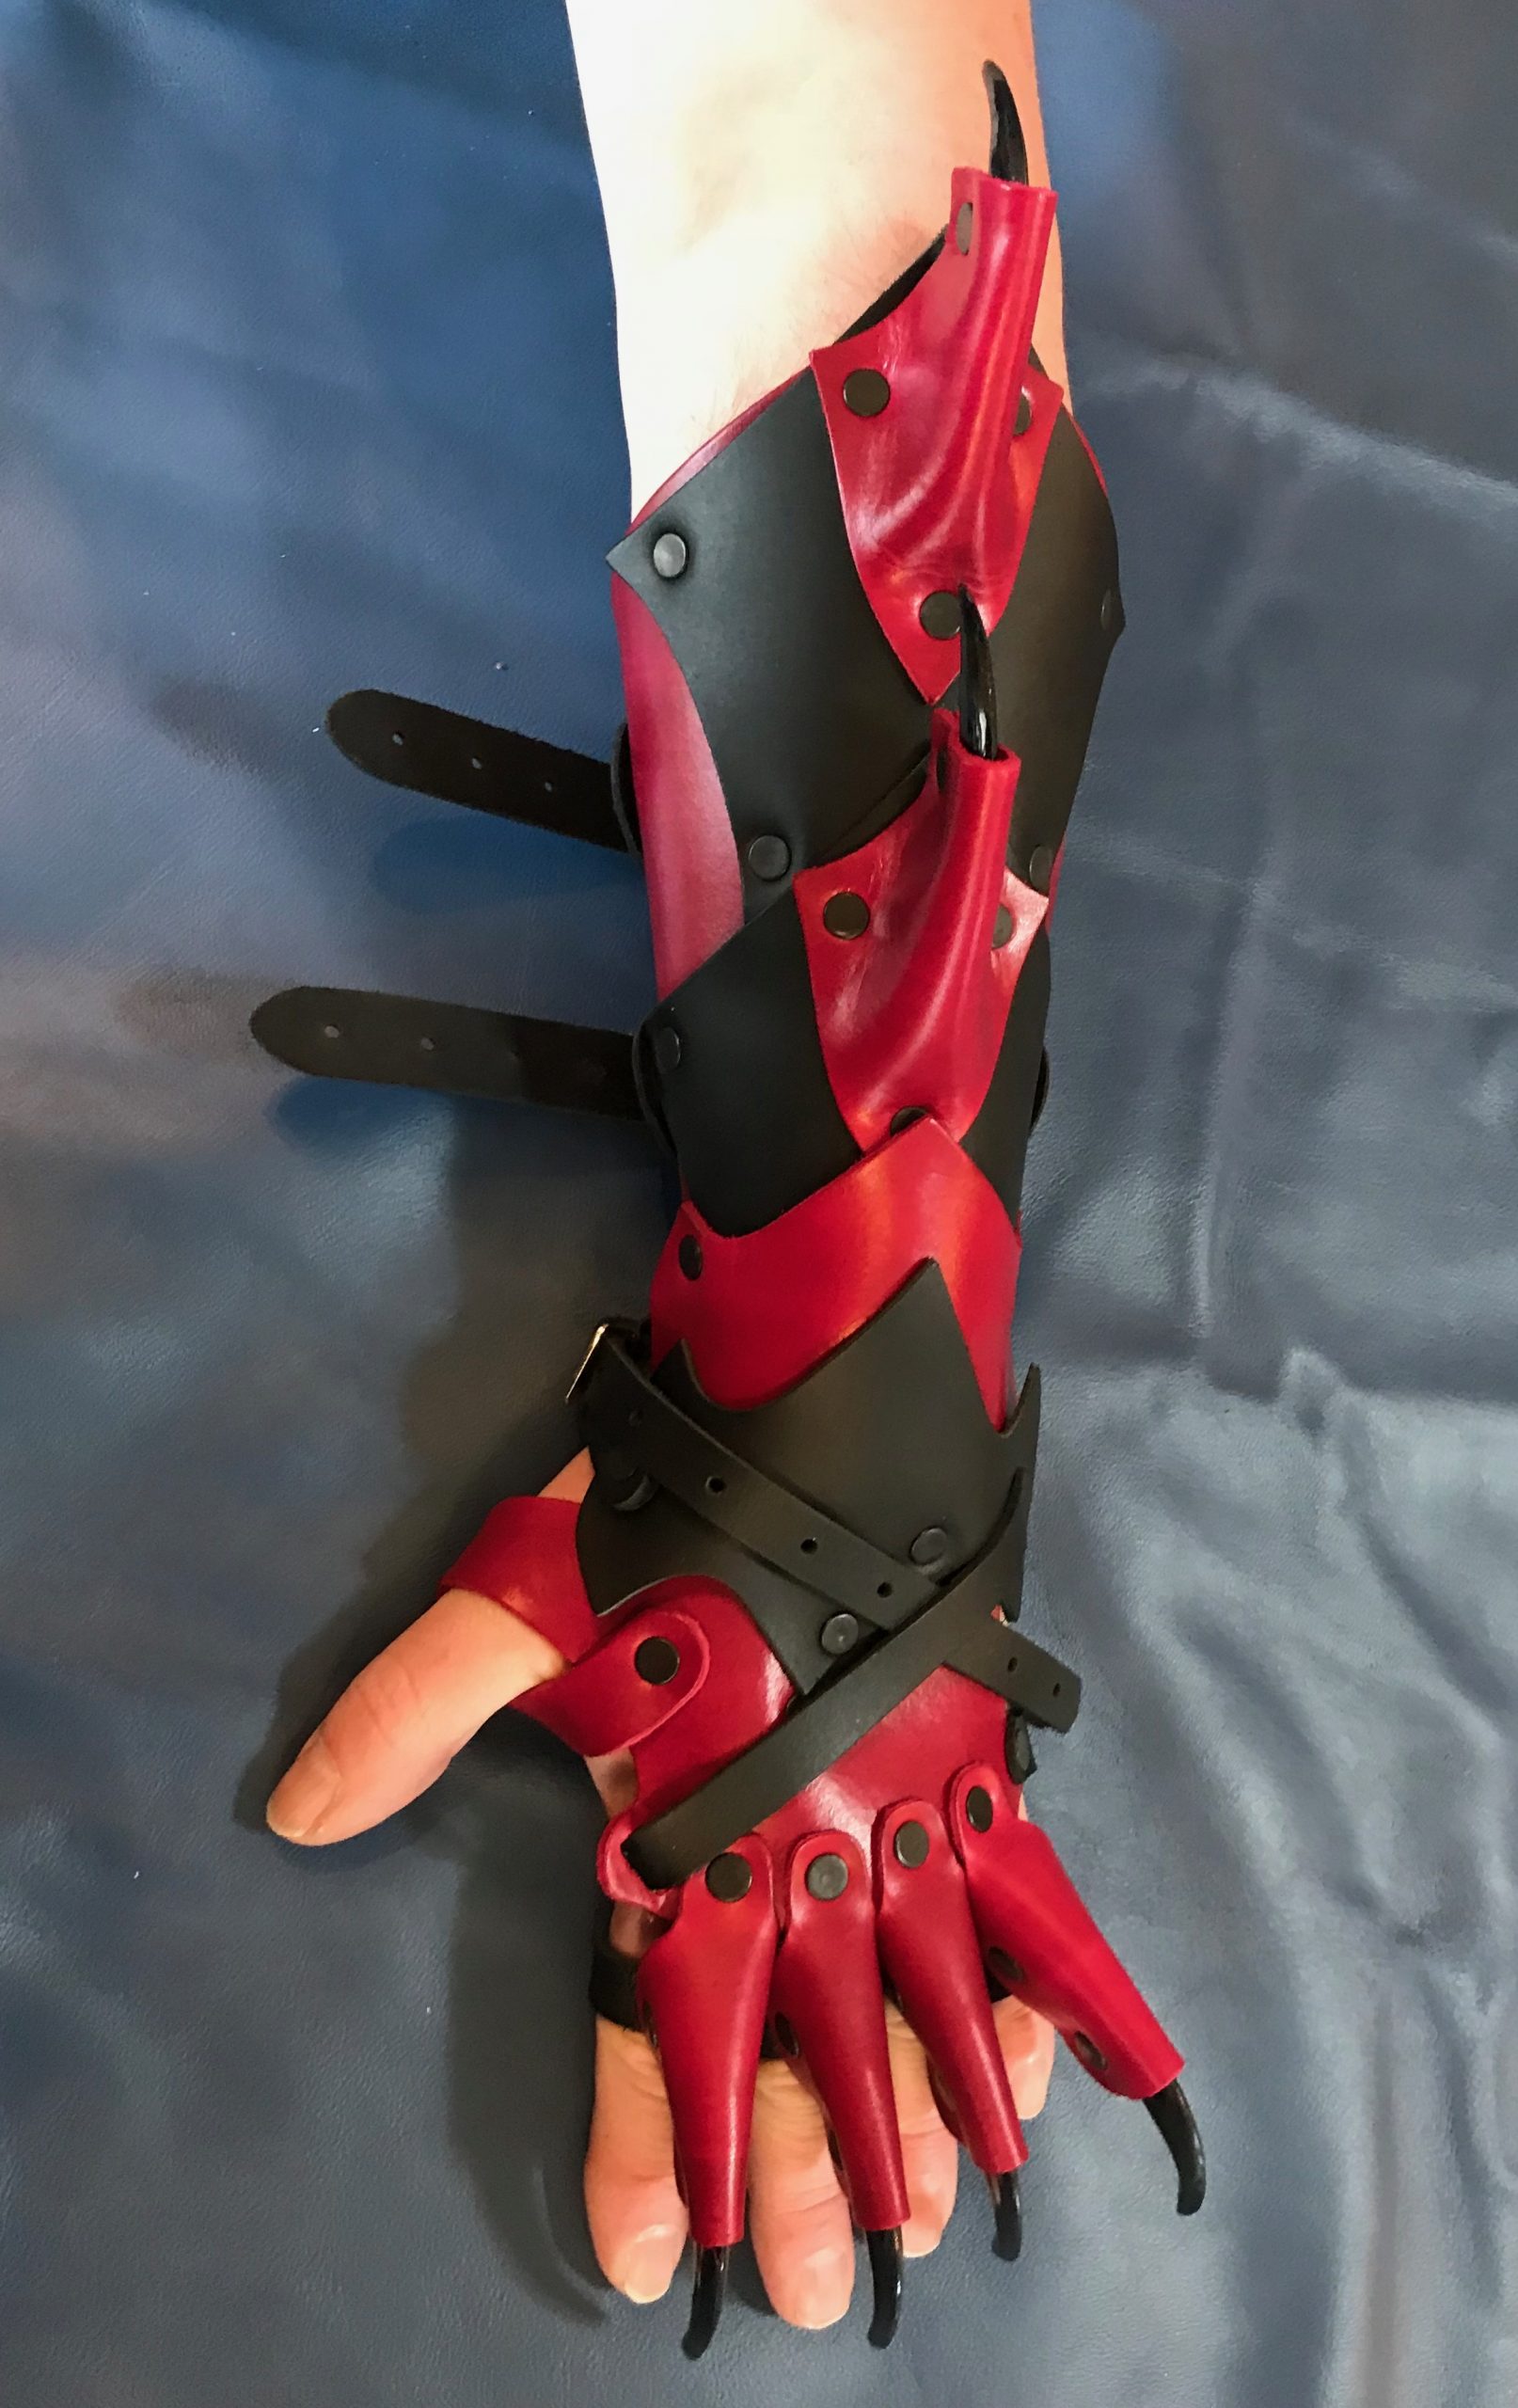 claw gauntlet weapon